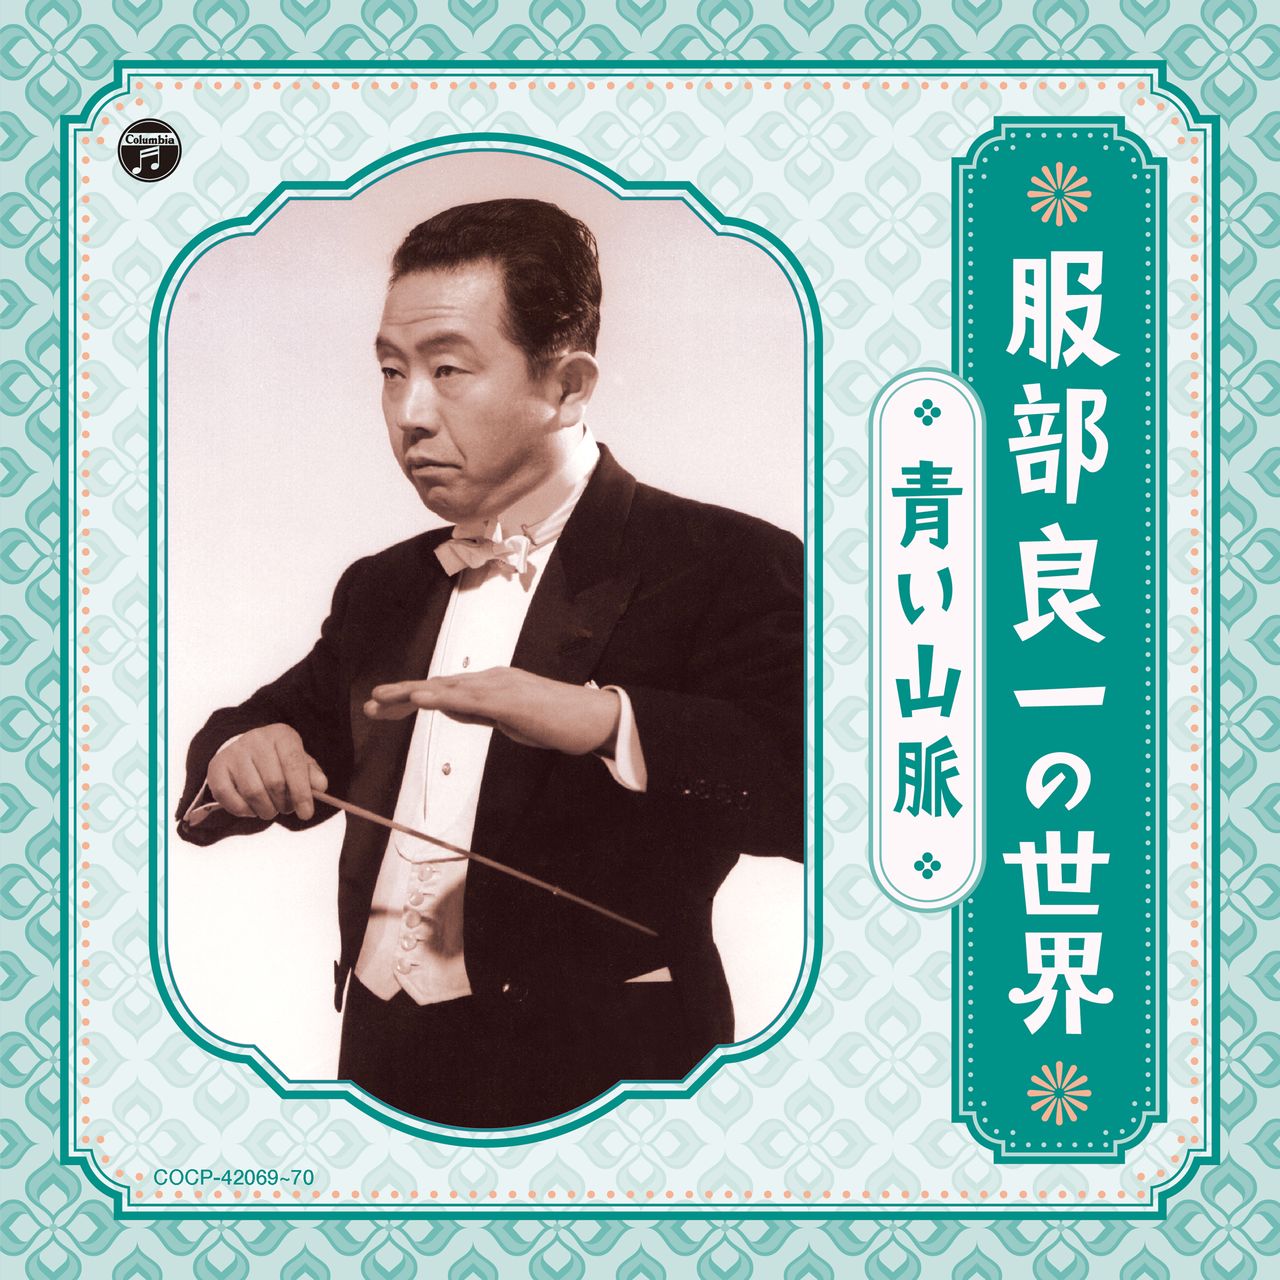 Hattori Ryōichi no sekai: Aoi sanmyaku (The World of Hattori Ryōichi: Blue Mountains), a two-CD collection of Hattori’s favorite songs, recently released by Nippon Columbia.